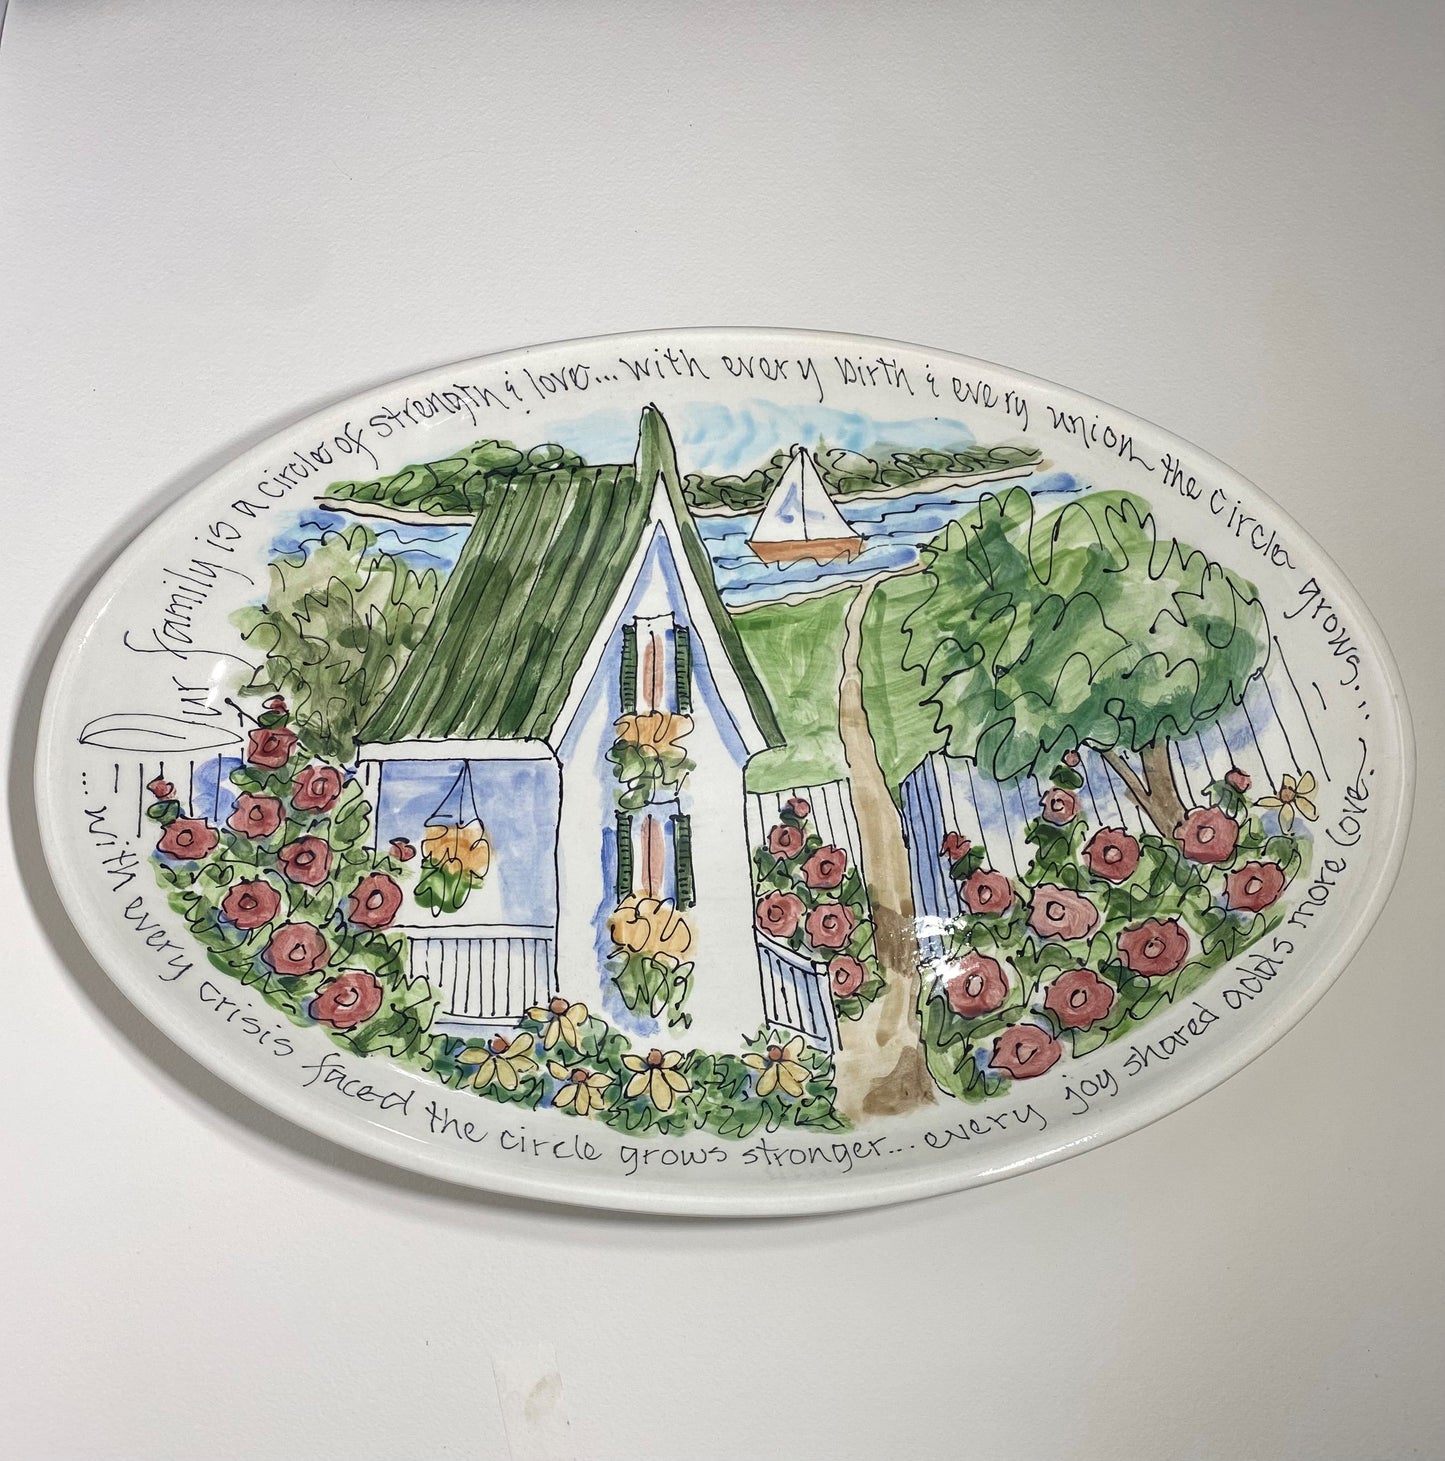 Jan Francoeur Platter Oval Lg Our Family🎨 Jan's Celebration Pottery🎨 Buy Art at Carolina Creations Gallery in Downtown New Bern🎨